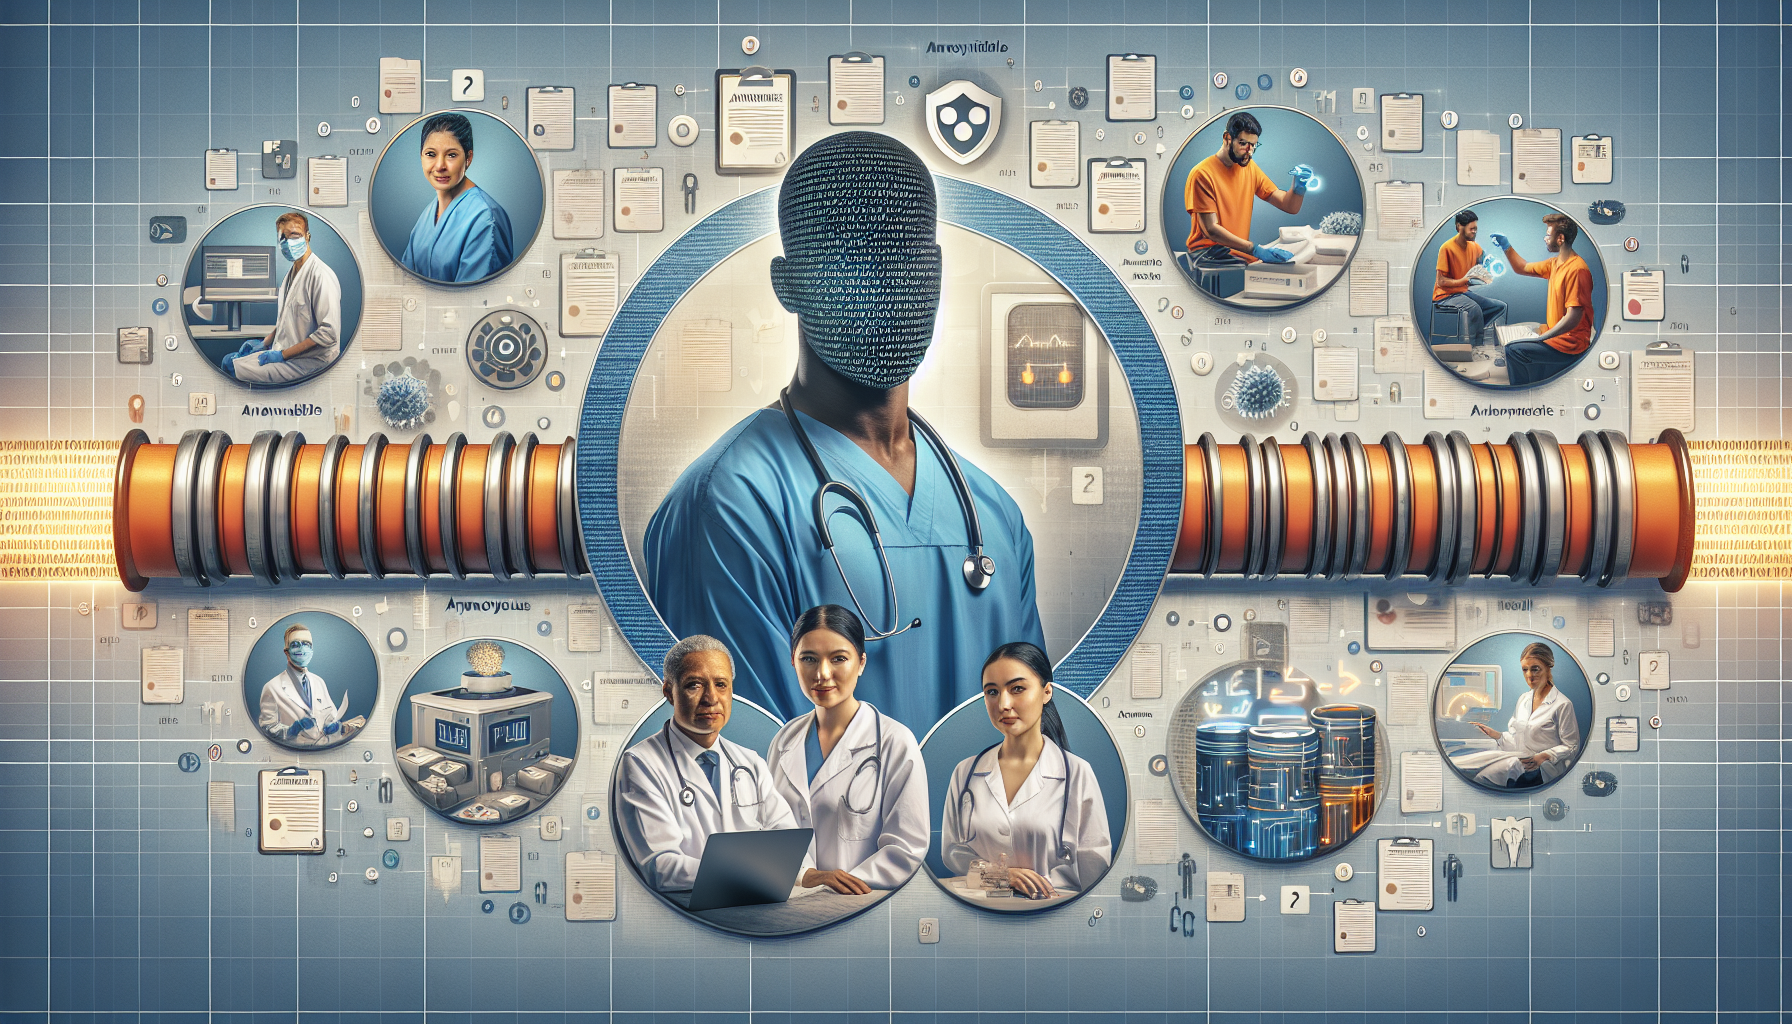 Approaches for Data Anonymization in Healthcare Utilizing Artificial Intelligence